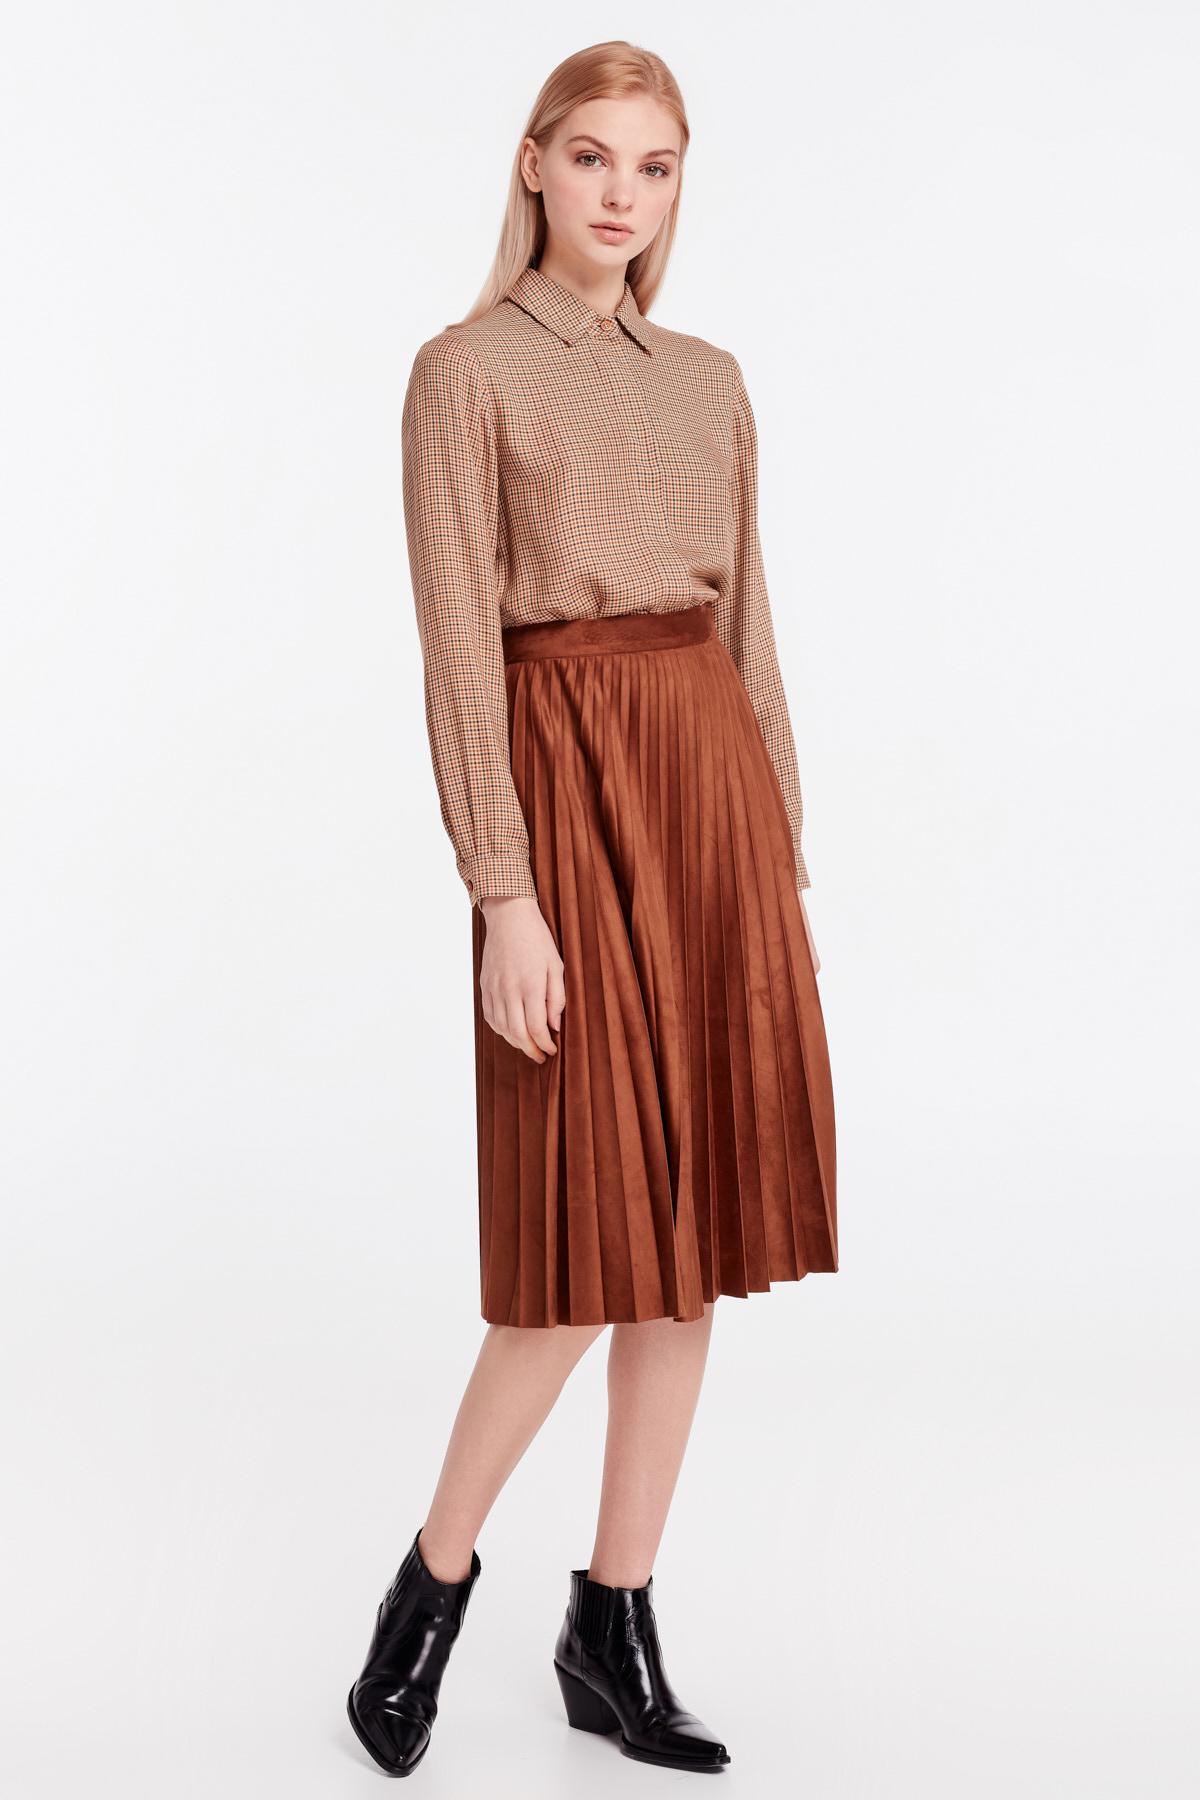 Brown suede pleated skirt, photo 10